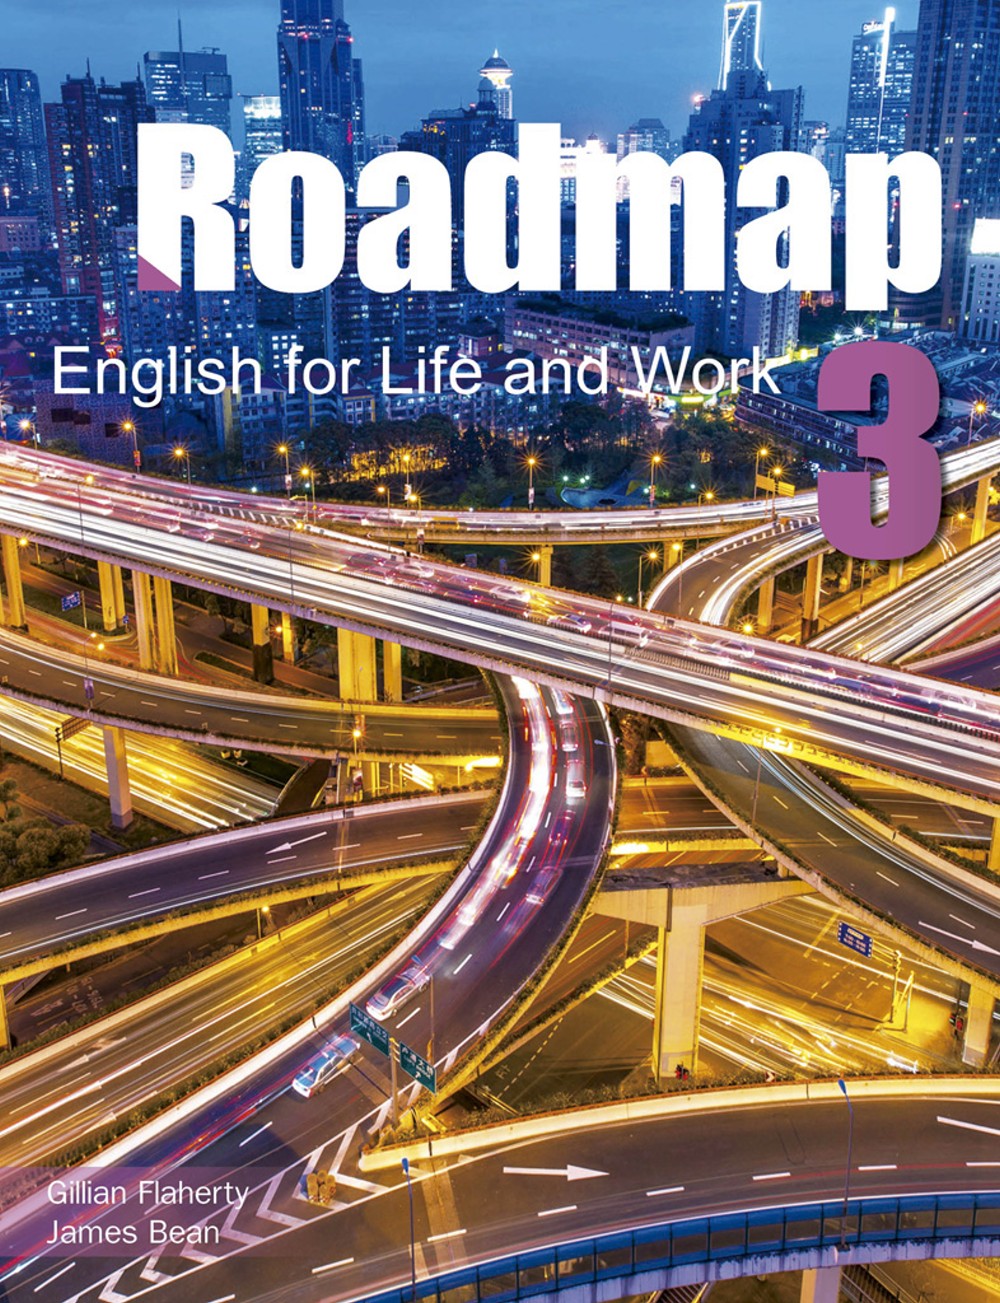 Roadmap 3: English for Life and Work